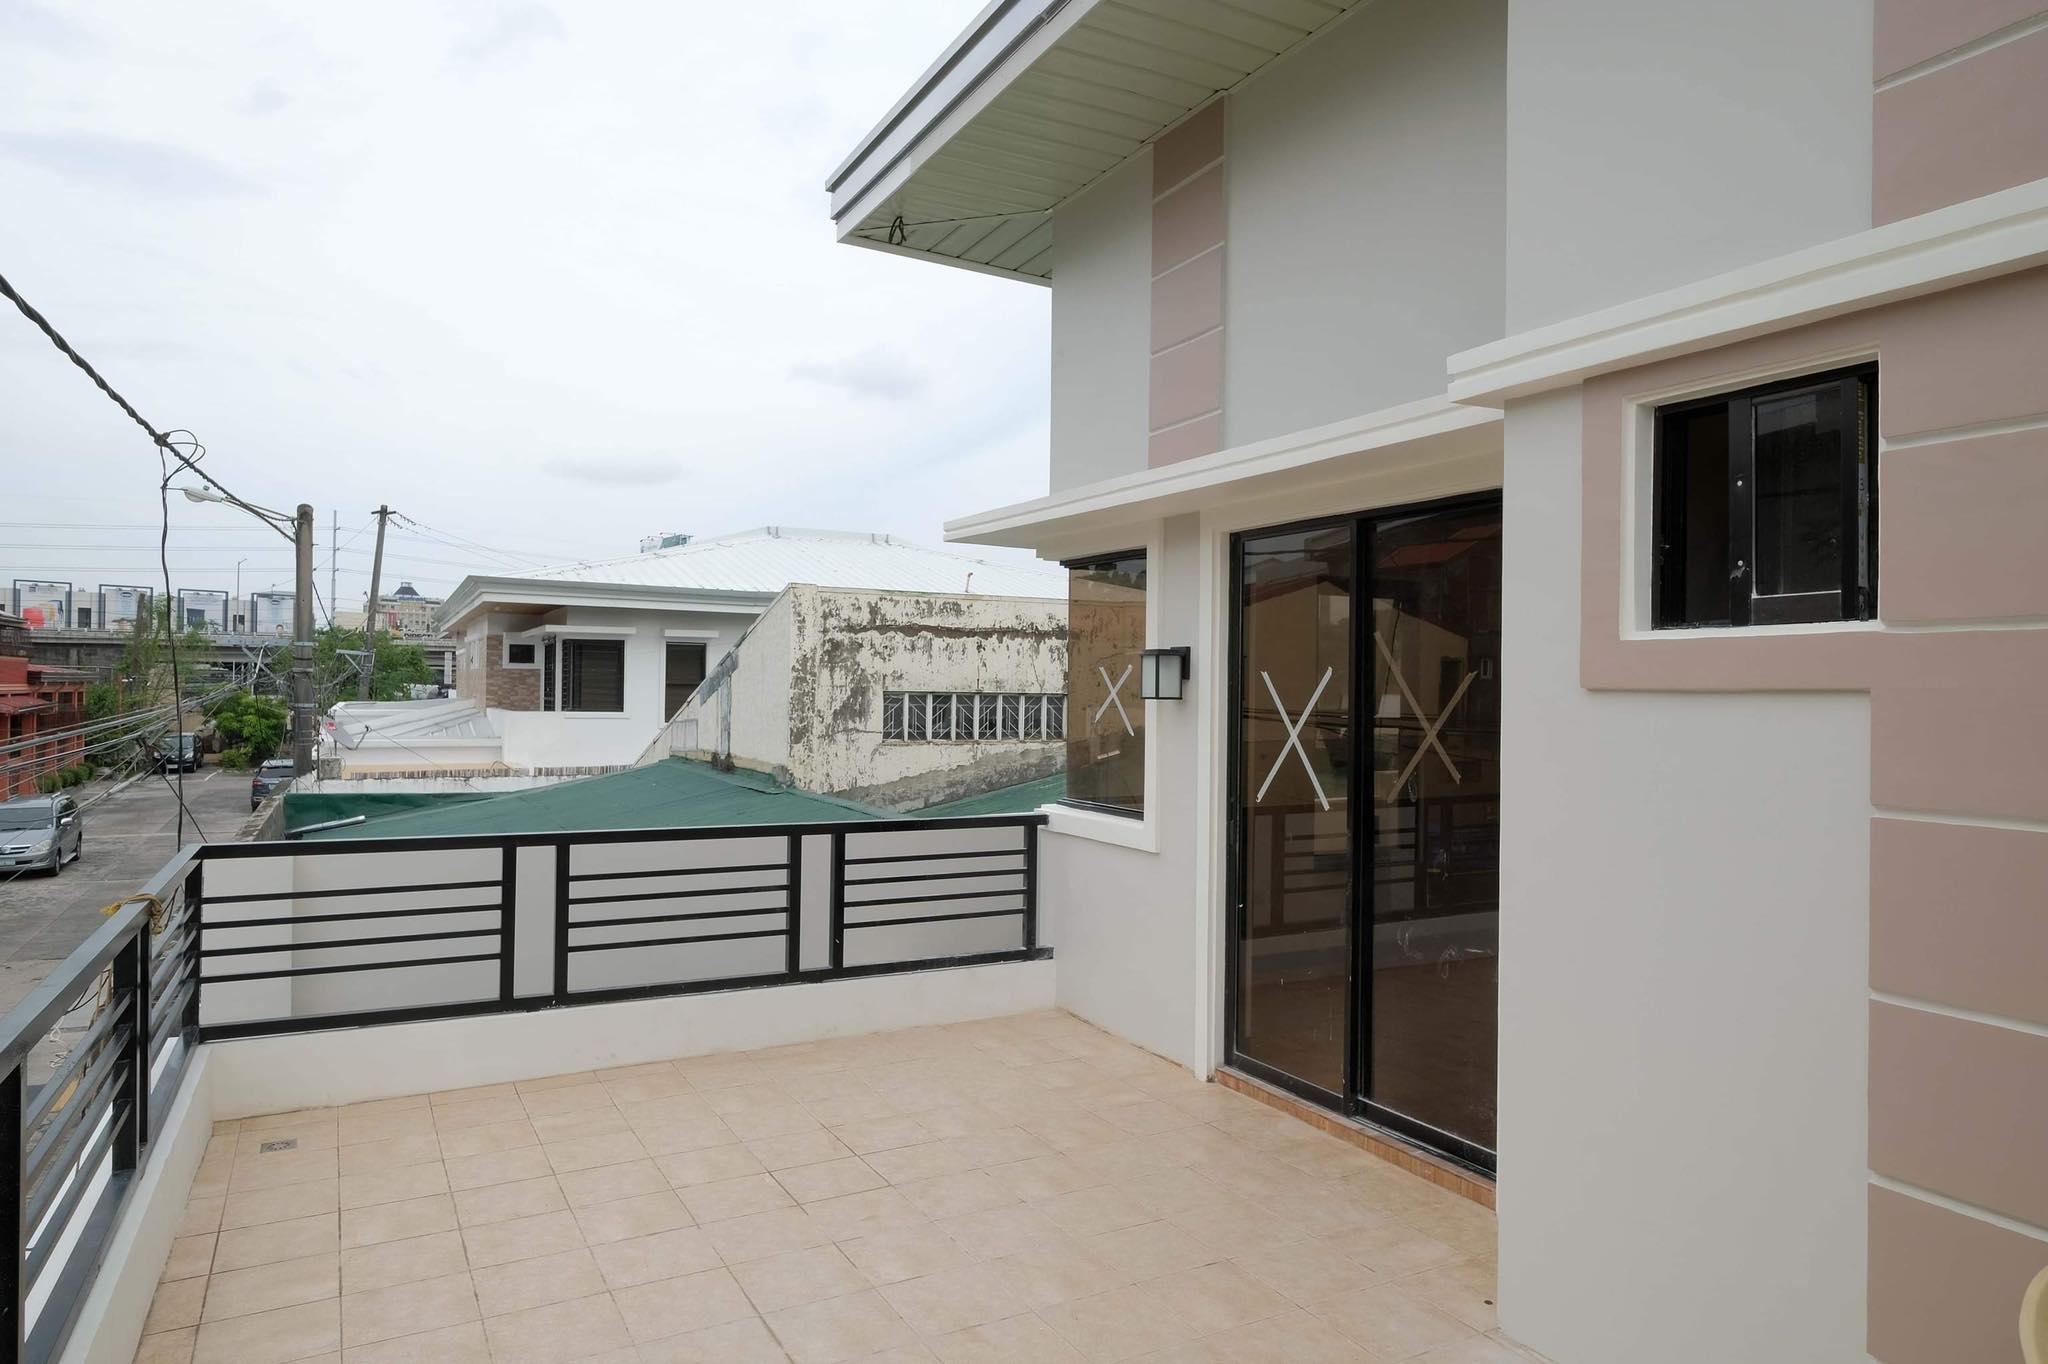 For Sale 4BR Paranaque House and Lot